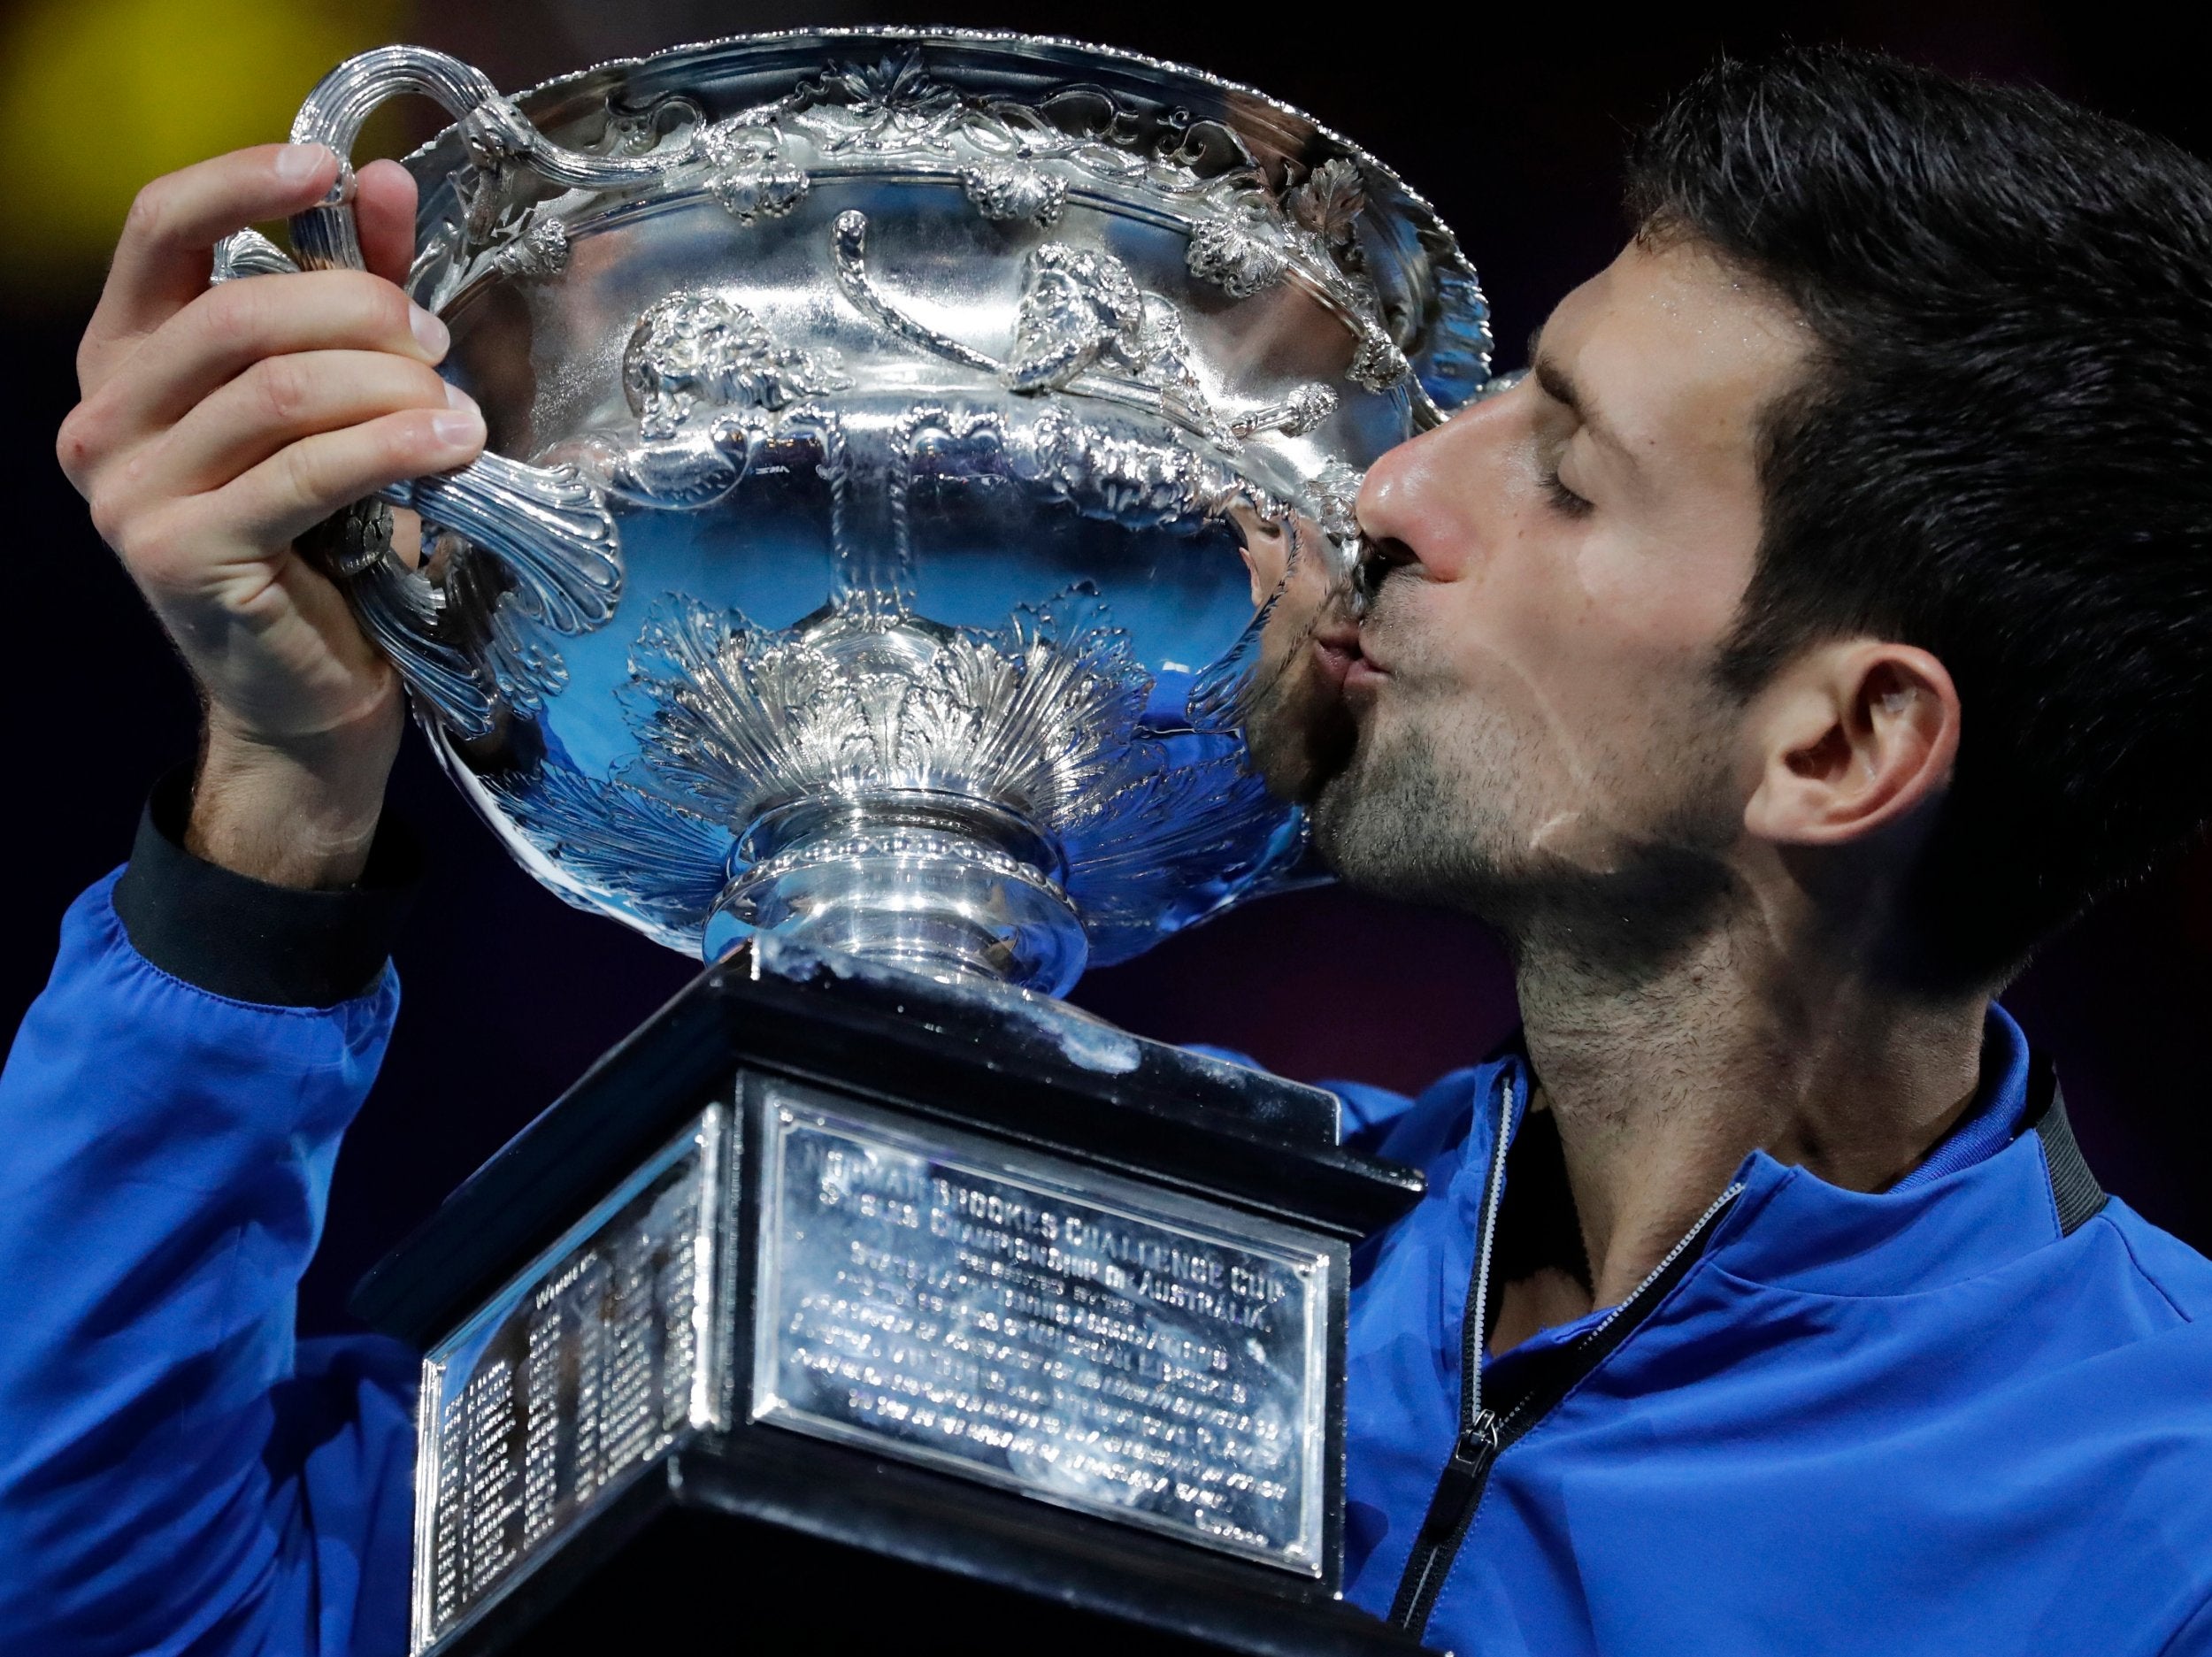 Djokovic lifted the winners trophy for the seventh time